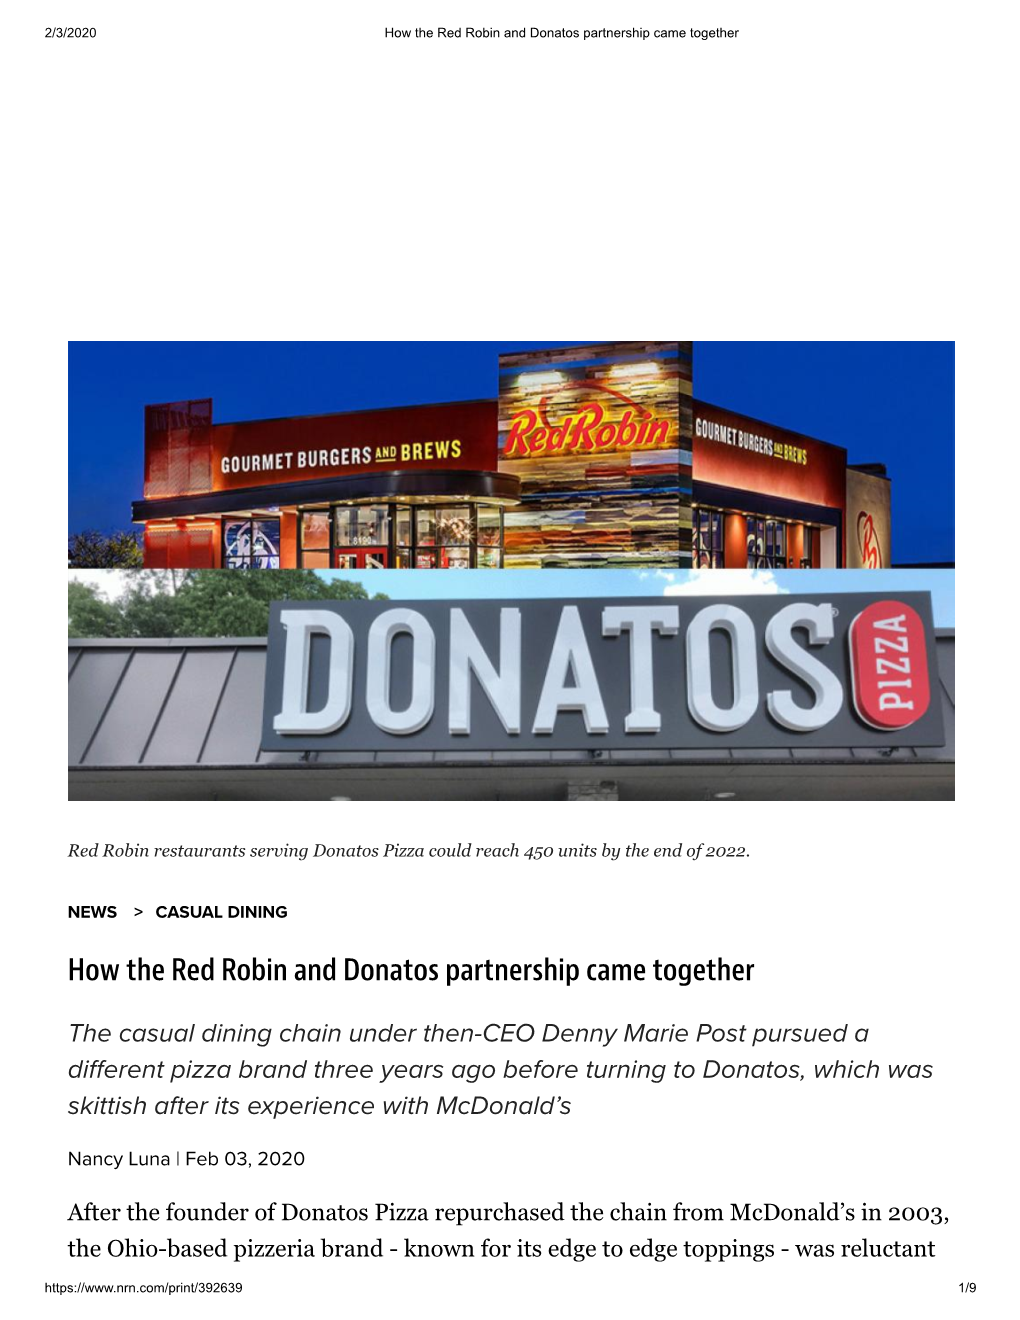 How the Red Robin and Donatos Partnership Came Together